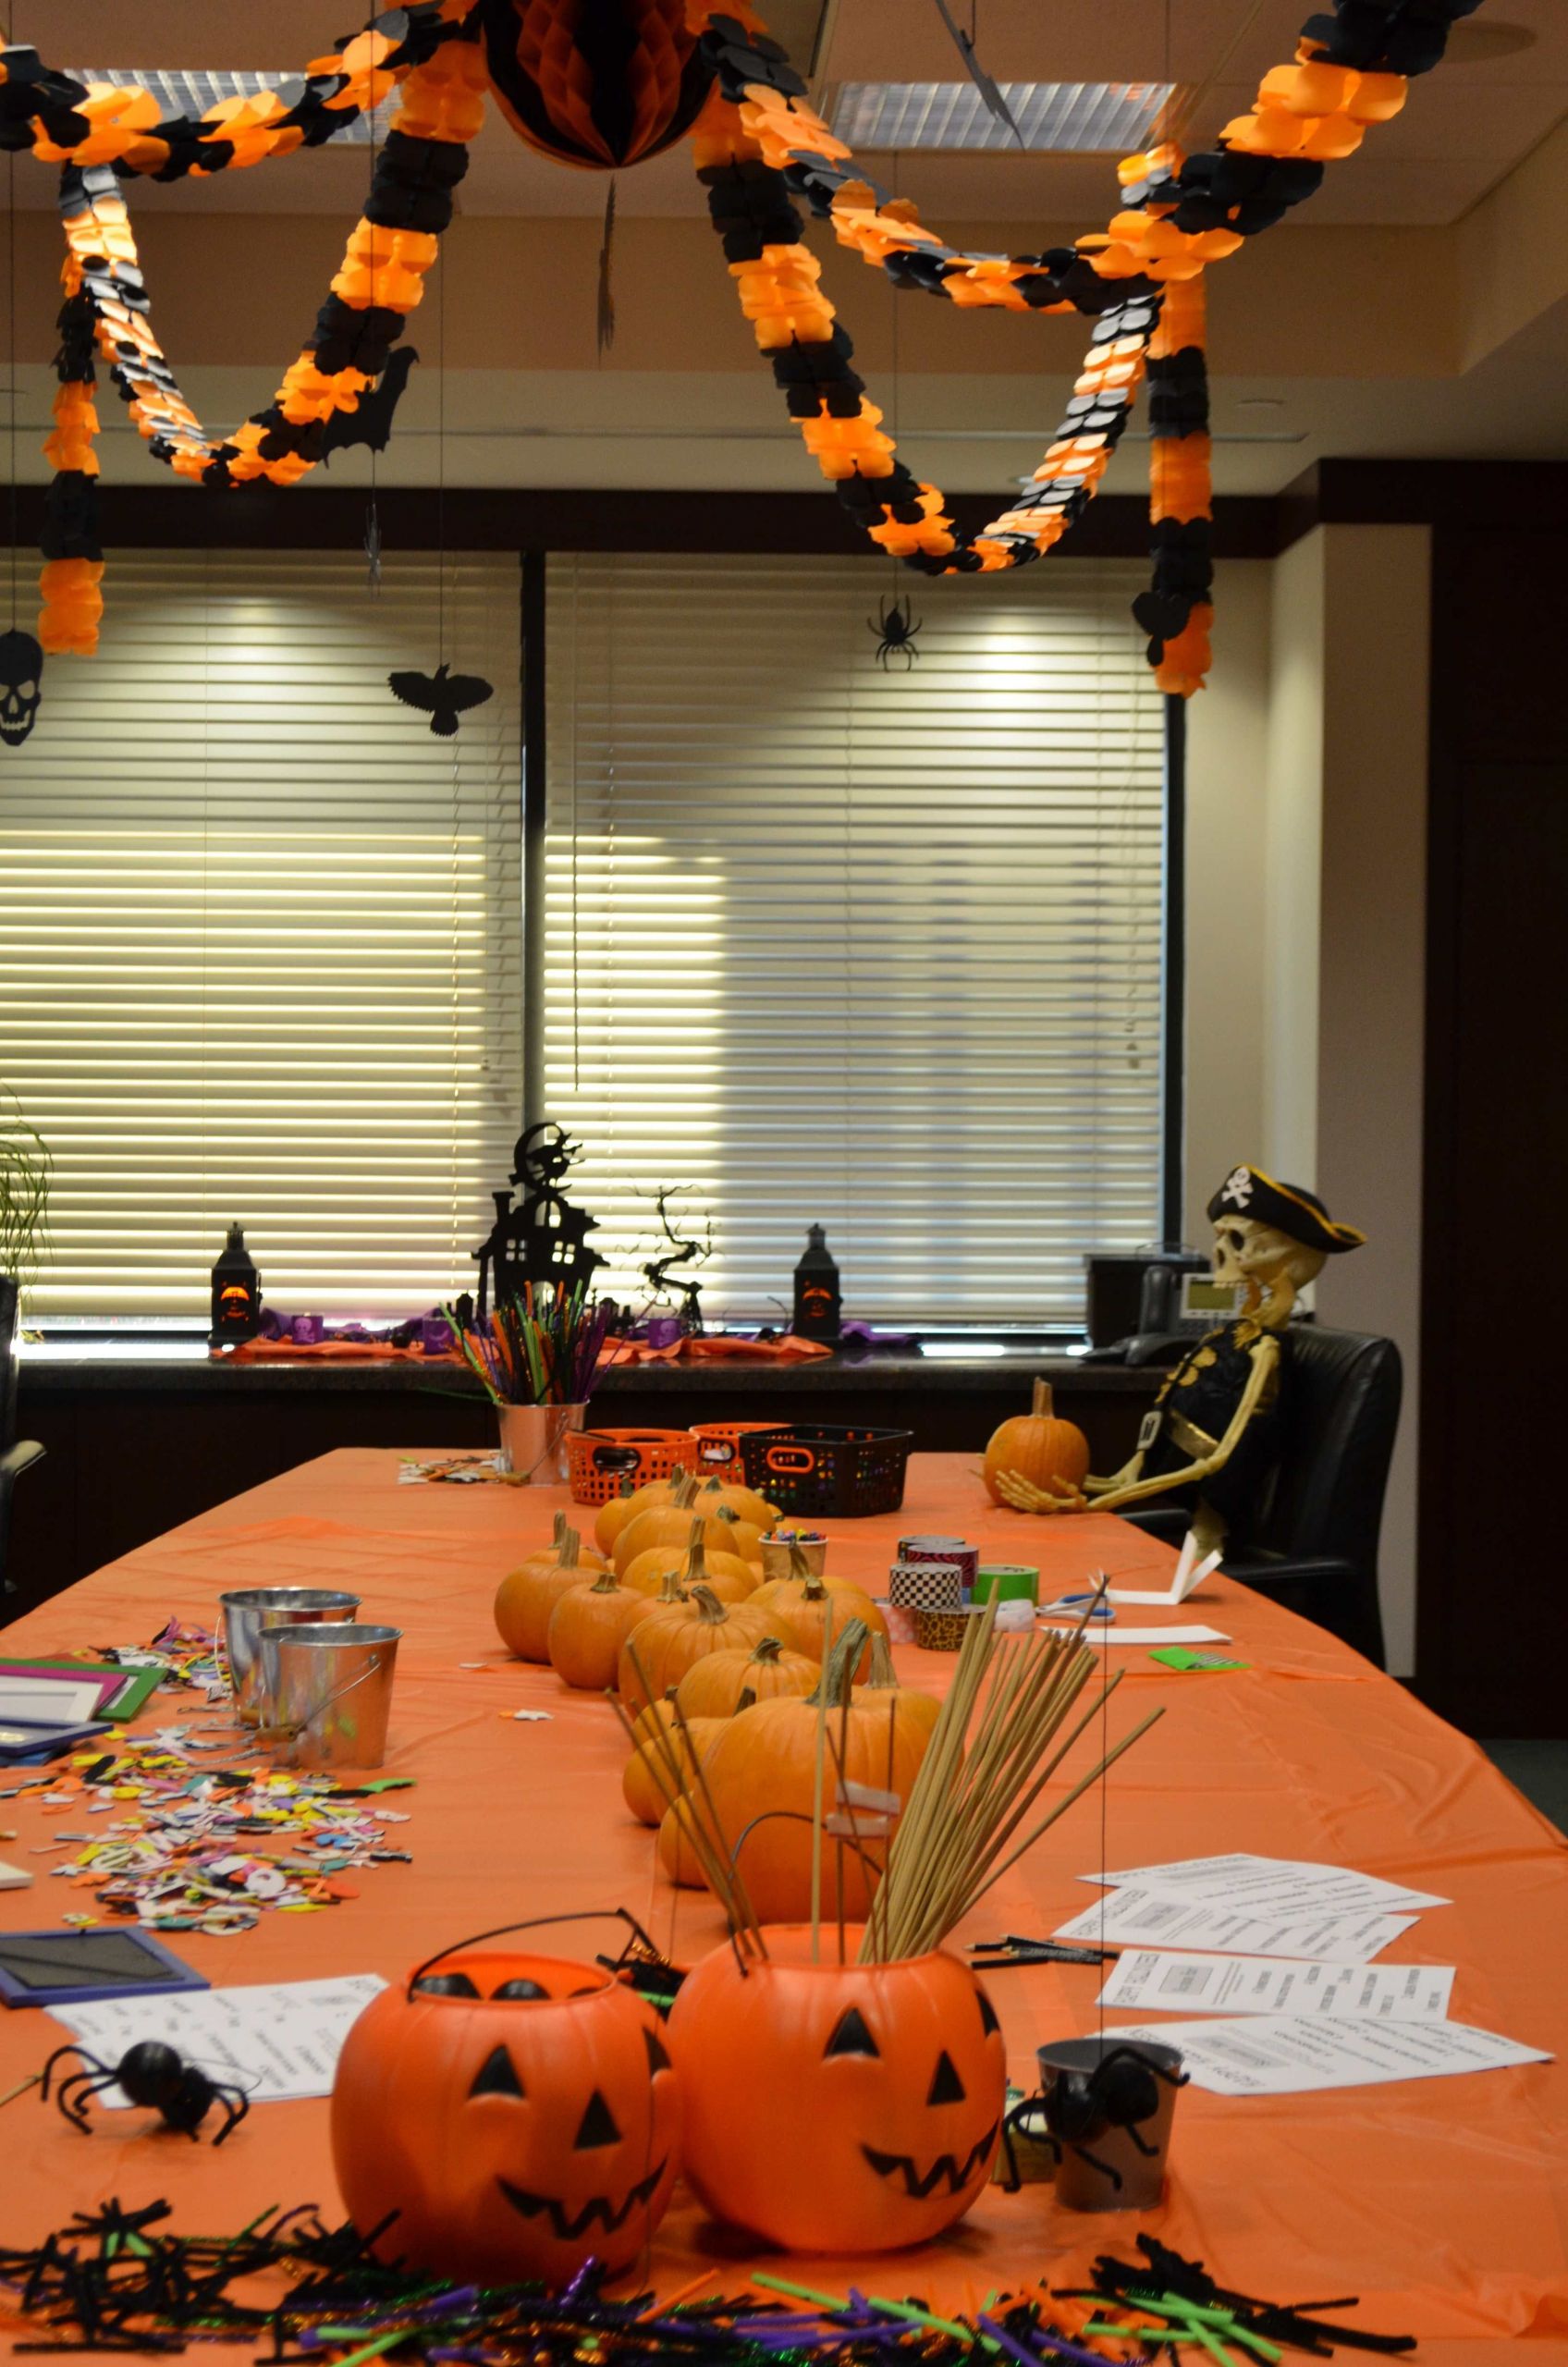 Children'S Halloween Party Decoration Ideas
 Halloween decorations for an office by kidsposhparties